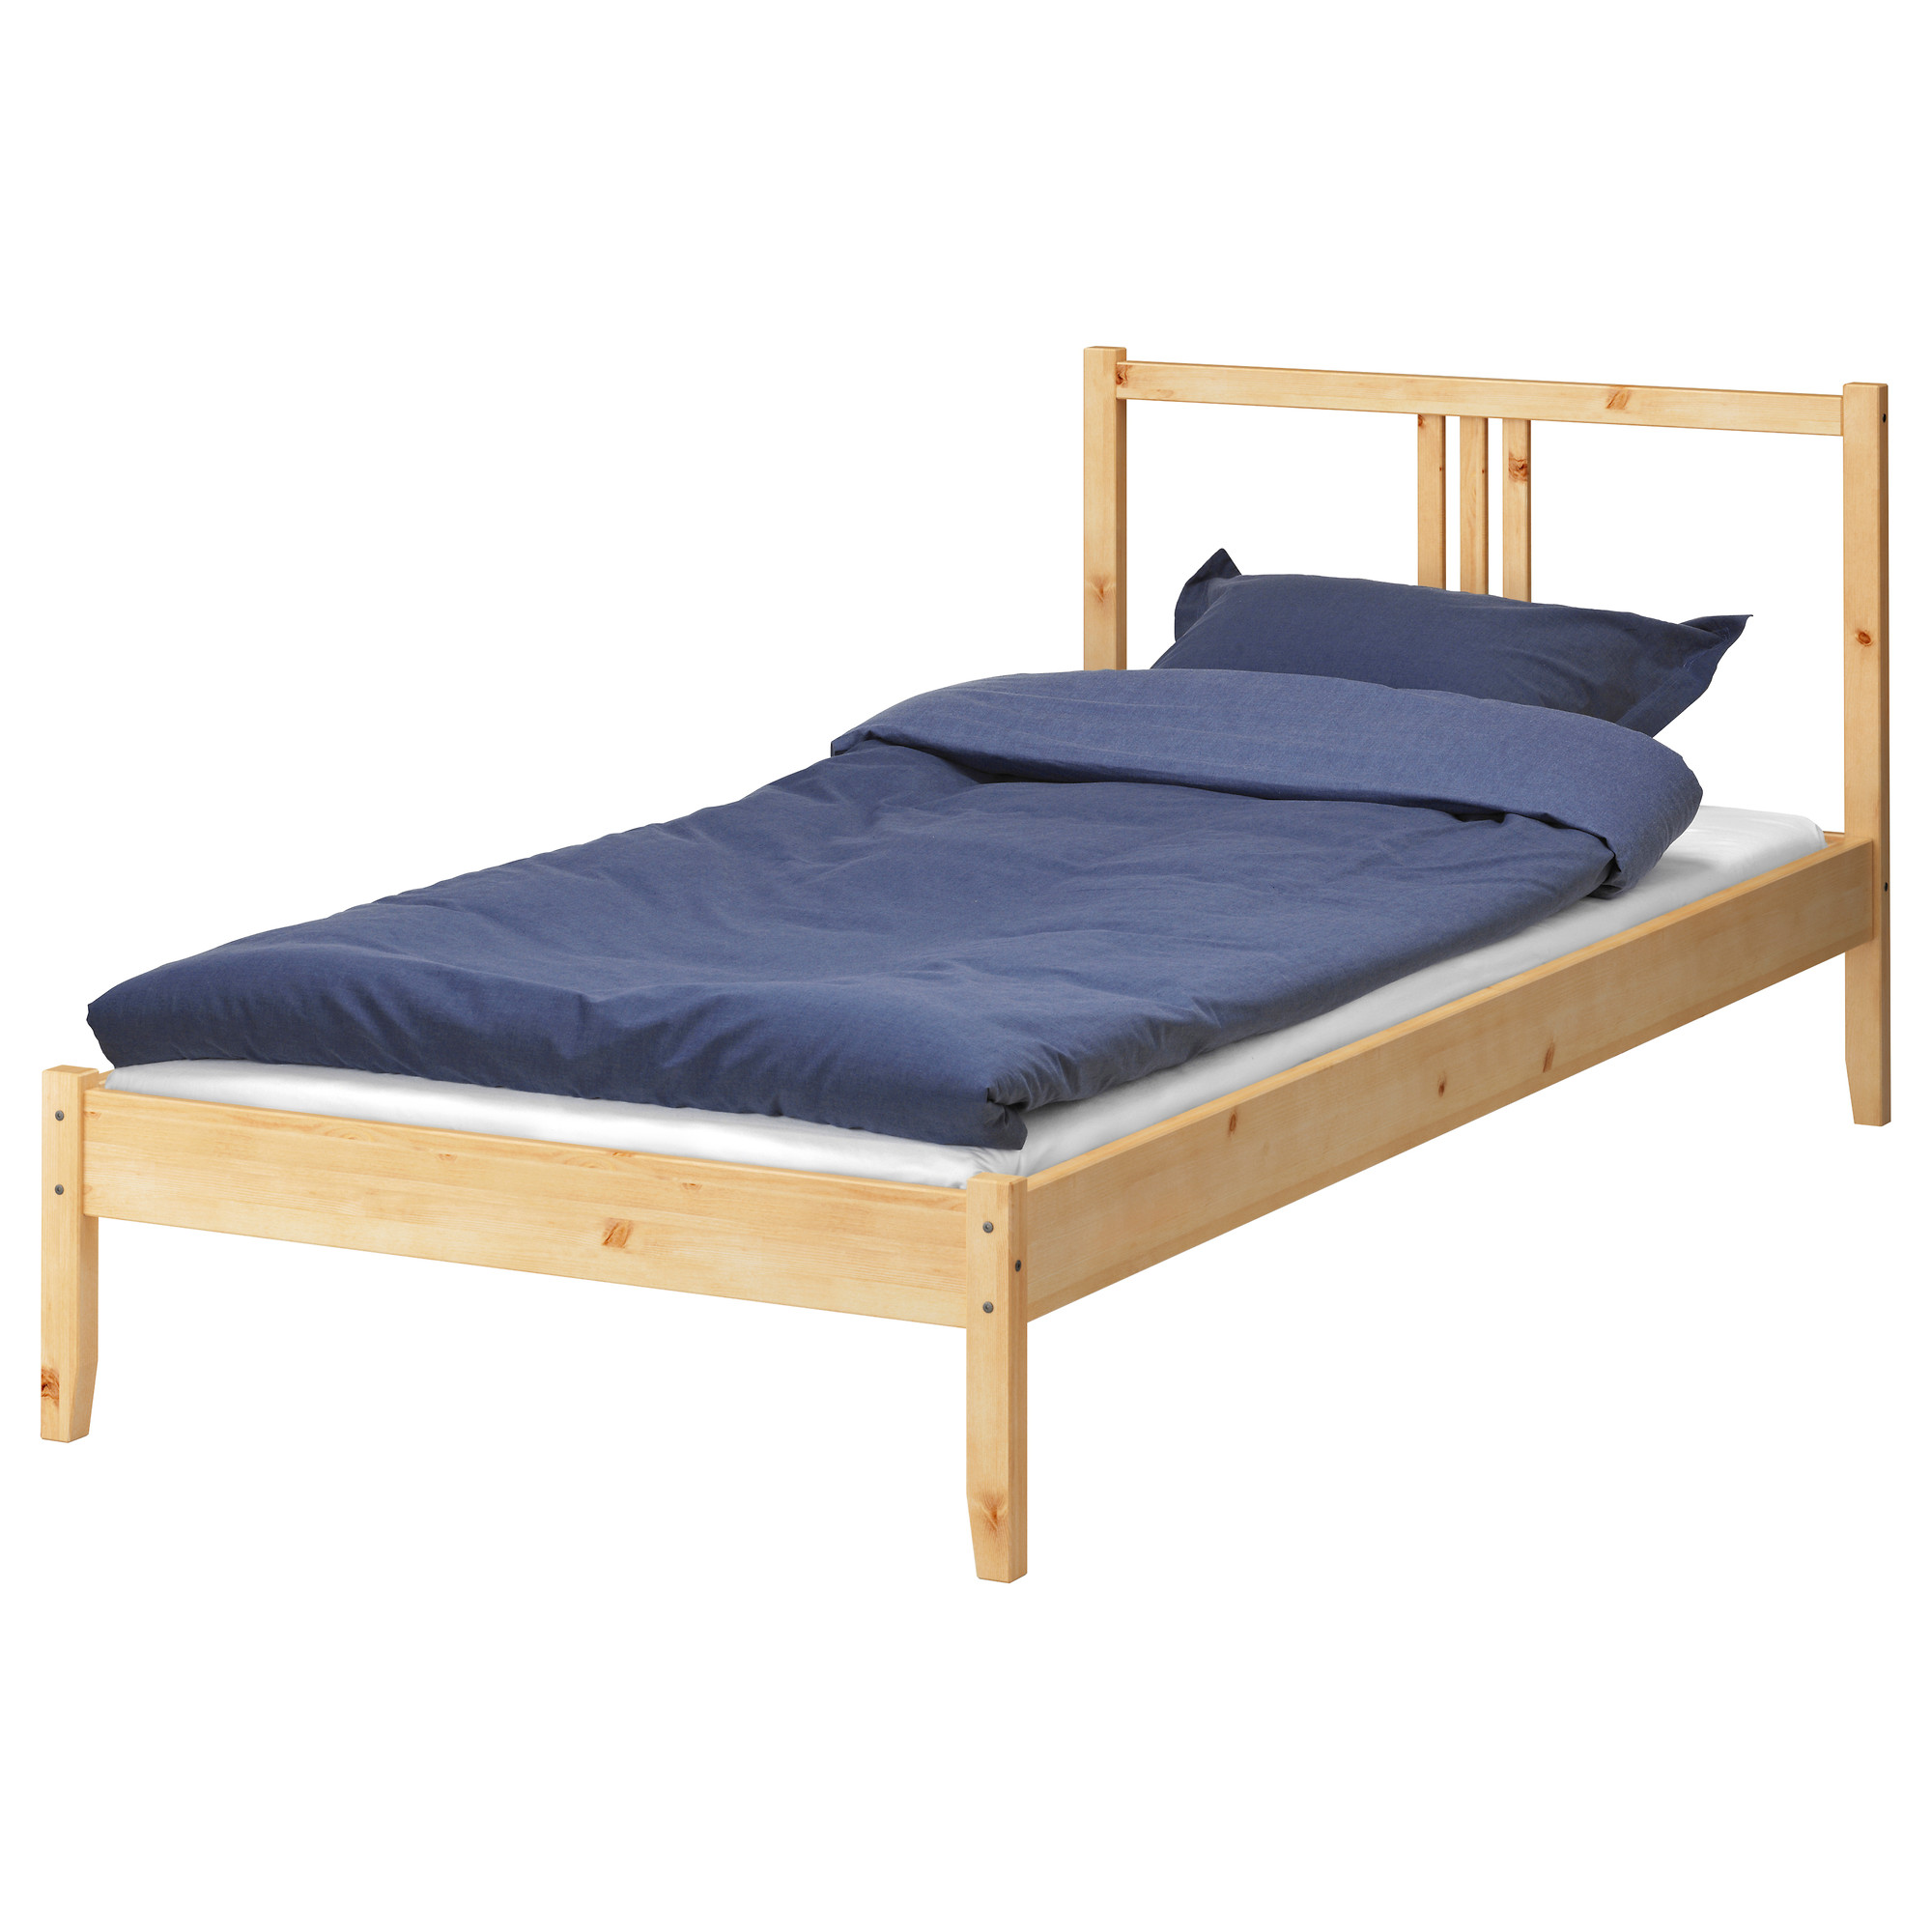 Cool FJELLSE Bed frame - Full/Double - IKEA twin bed frame